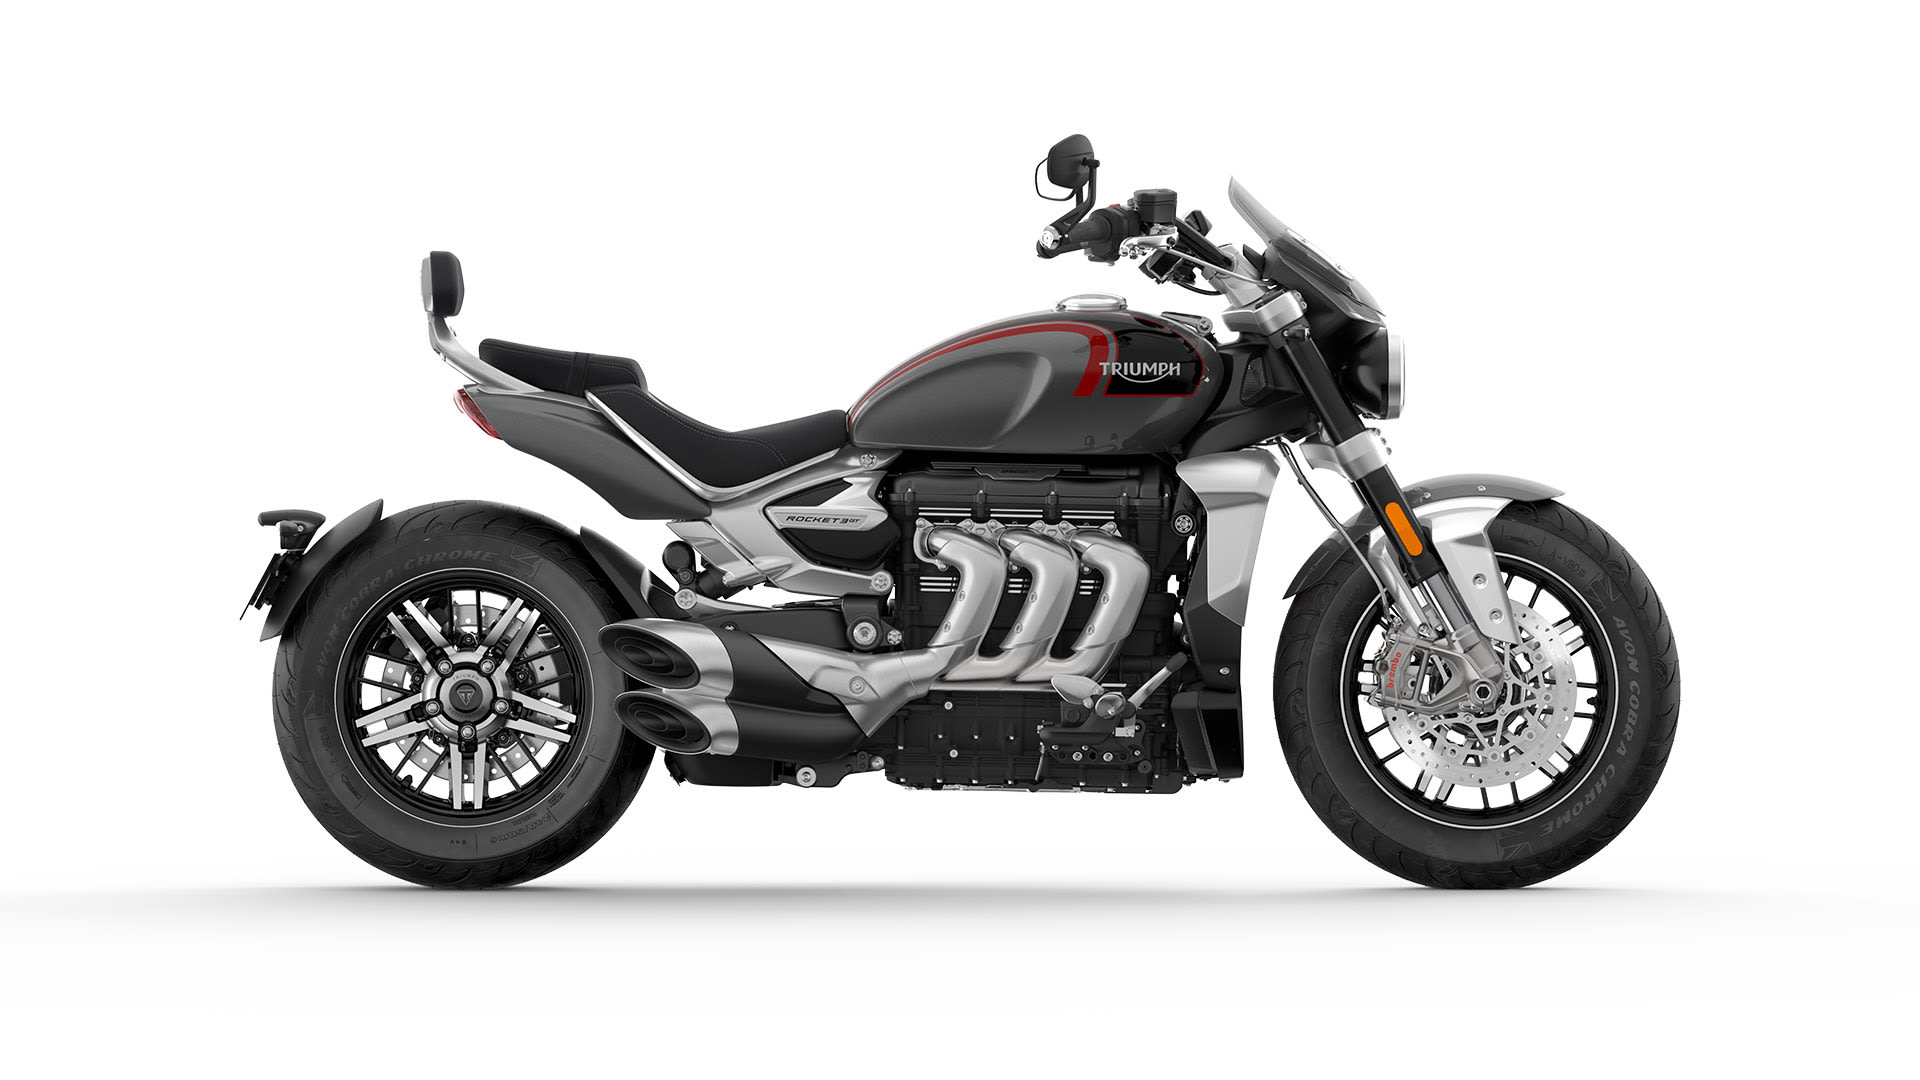 Side CGI shot of Triumph All-new Silver Ice and storm grey colour of the Rocket 3 GT. 